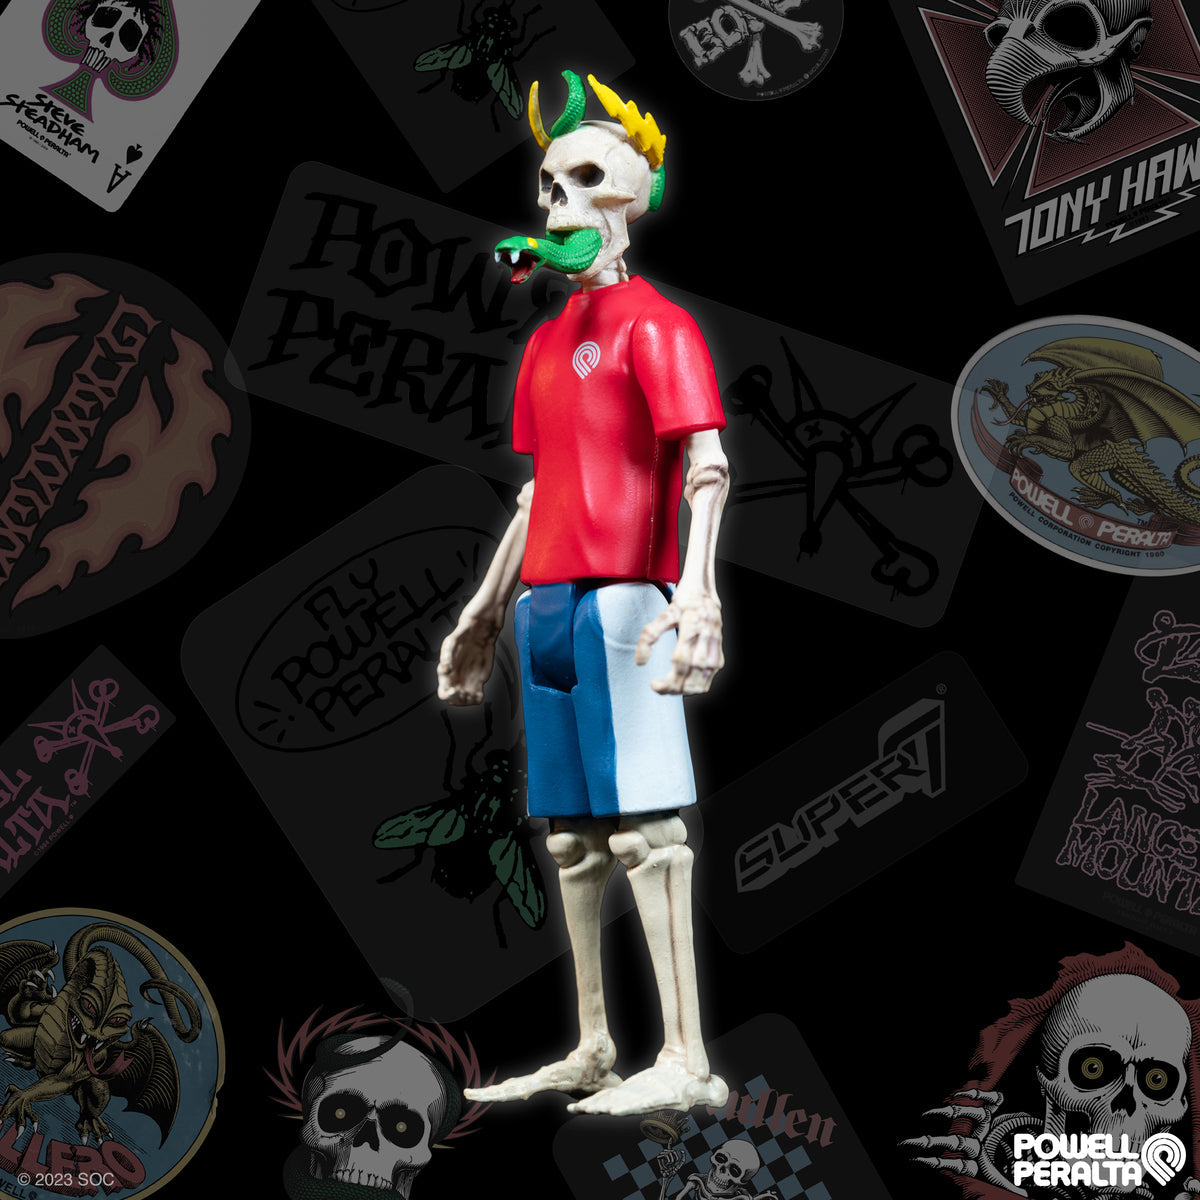 Super7 - POWELL PERALTA WAVE 2 - MIKE MCGILL